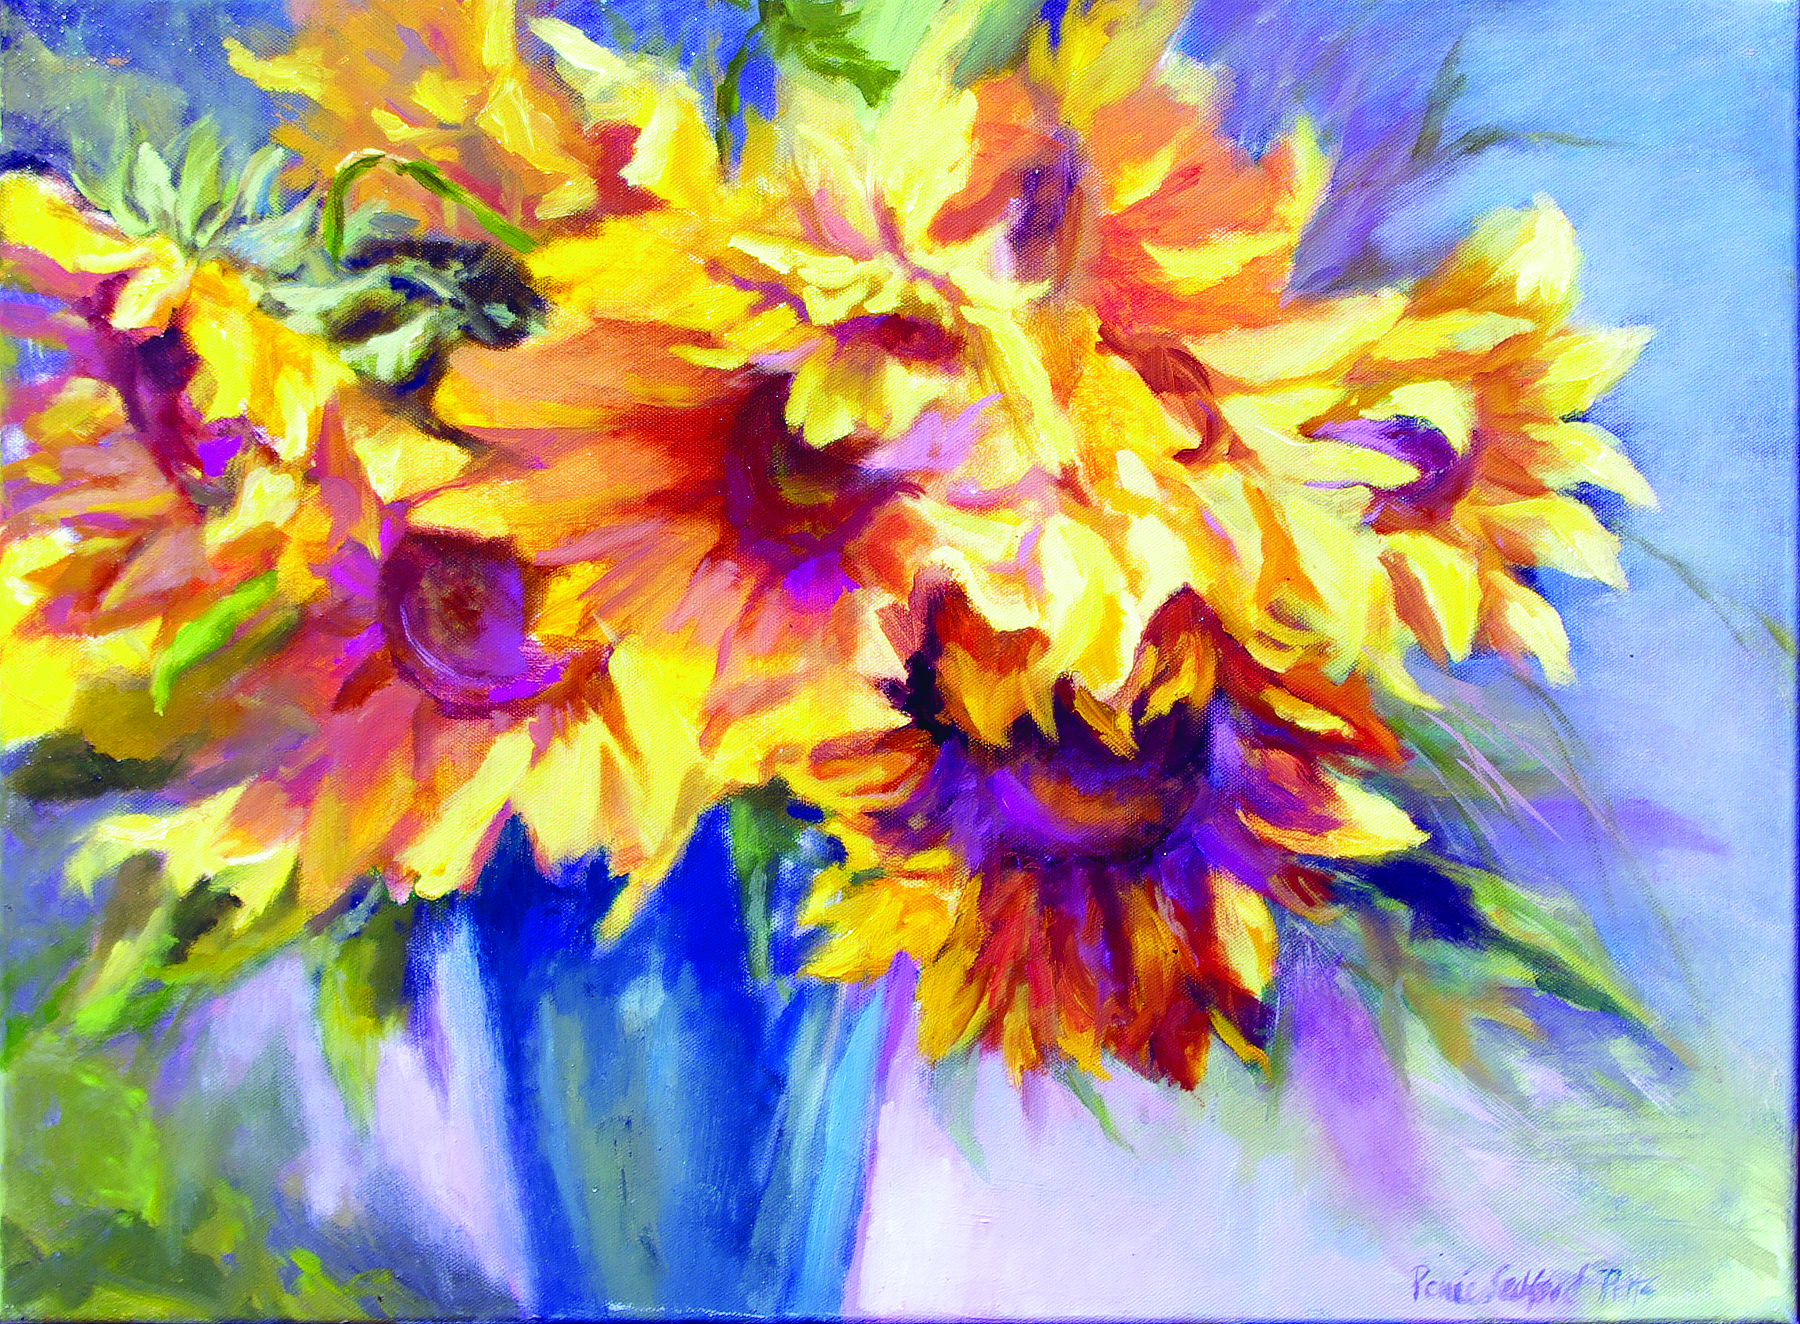 'Sunflowers' by Renee Pitts